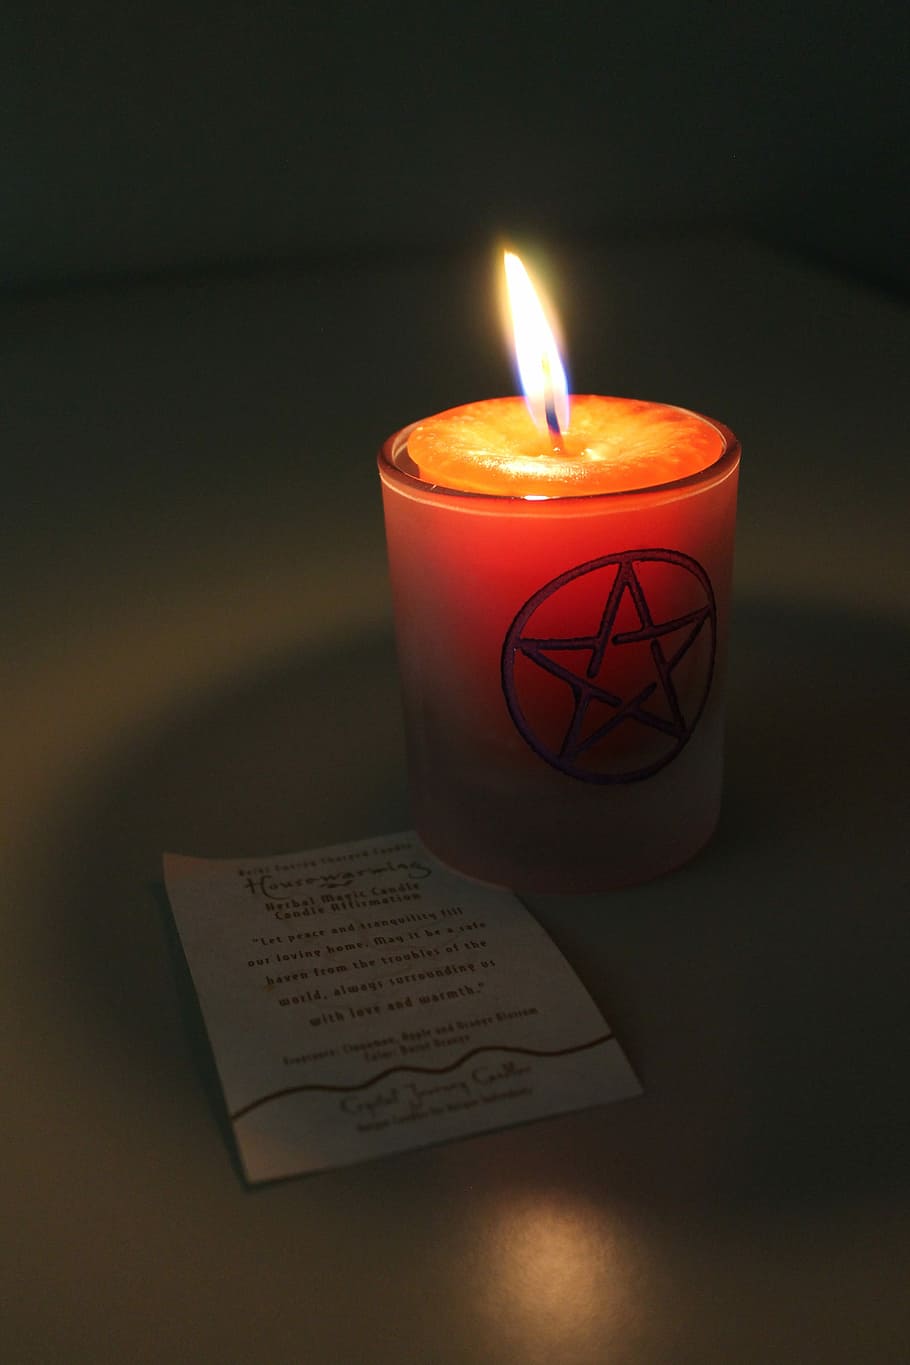 lighted, candle, star design, magic, candle magick, flame, spell, occult, esoteric, wicca